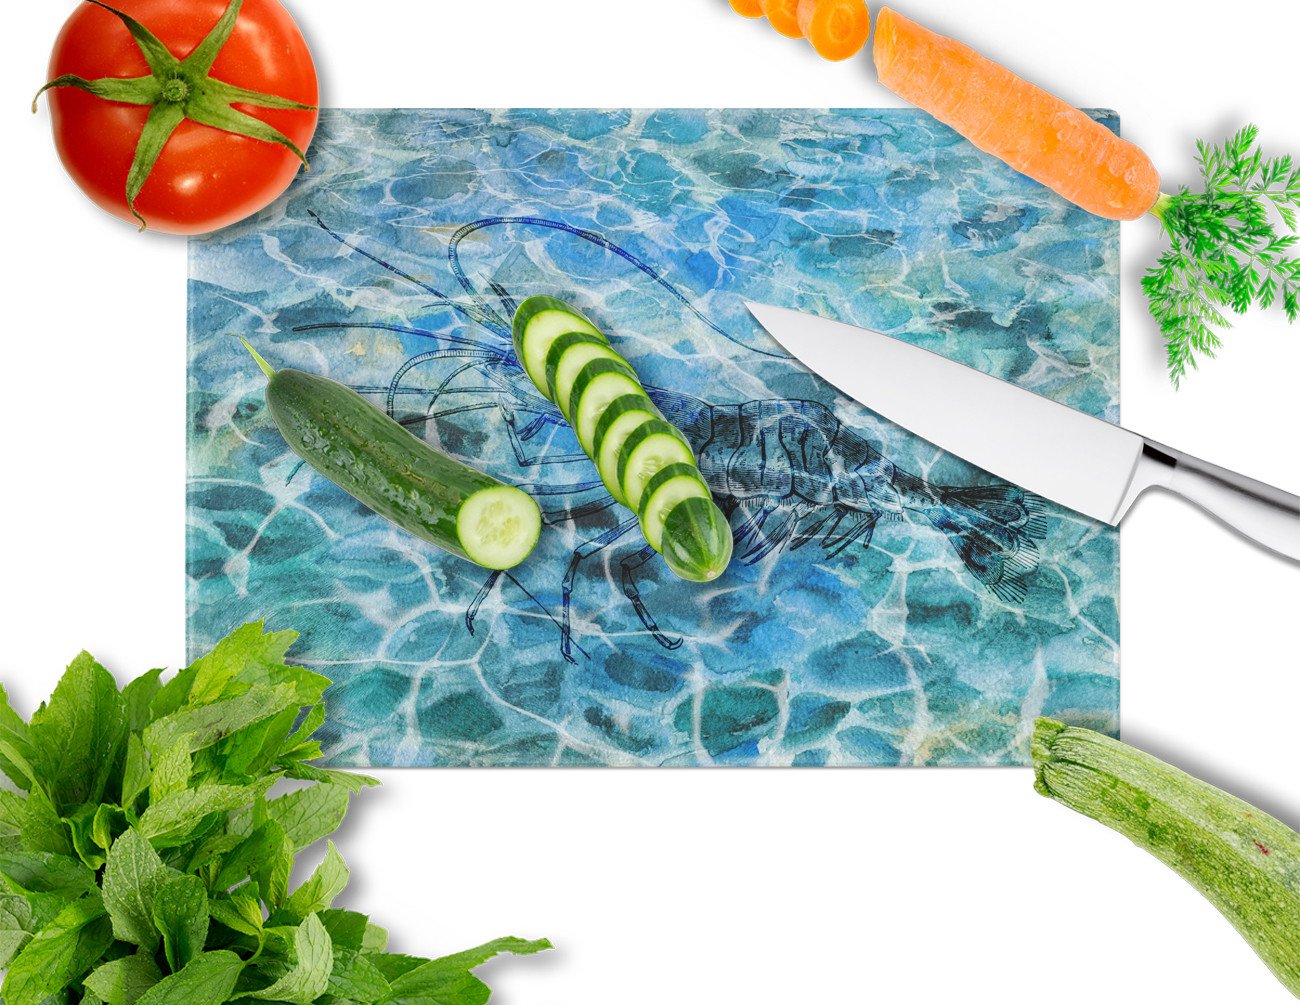 Shrimp Under water Glass Cutting Board Large BB5359LCB by Caroline's Treasures